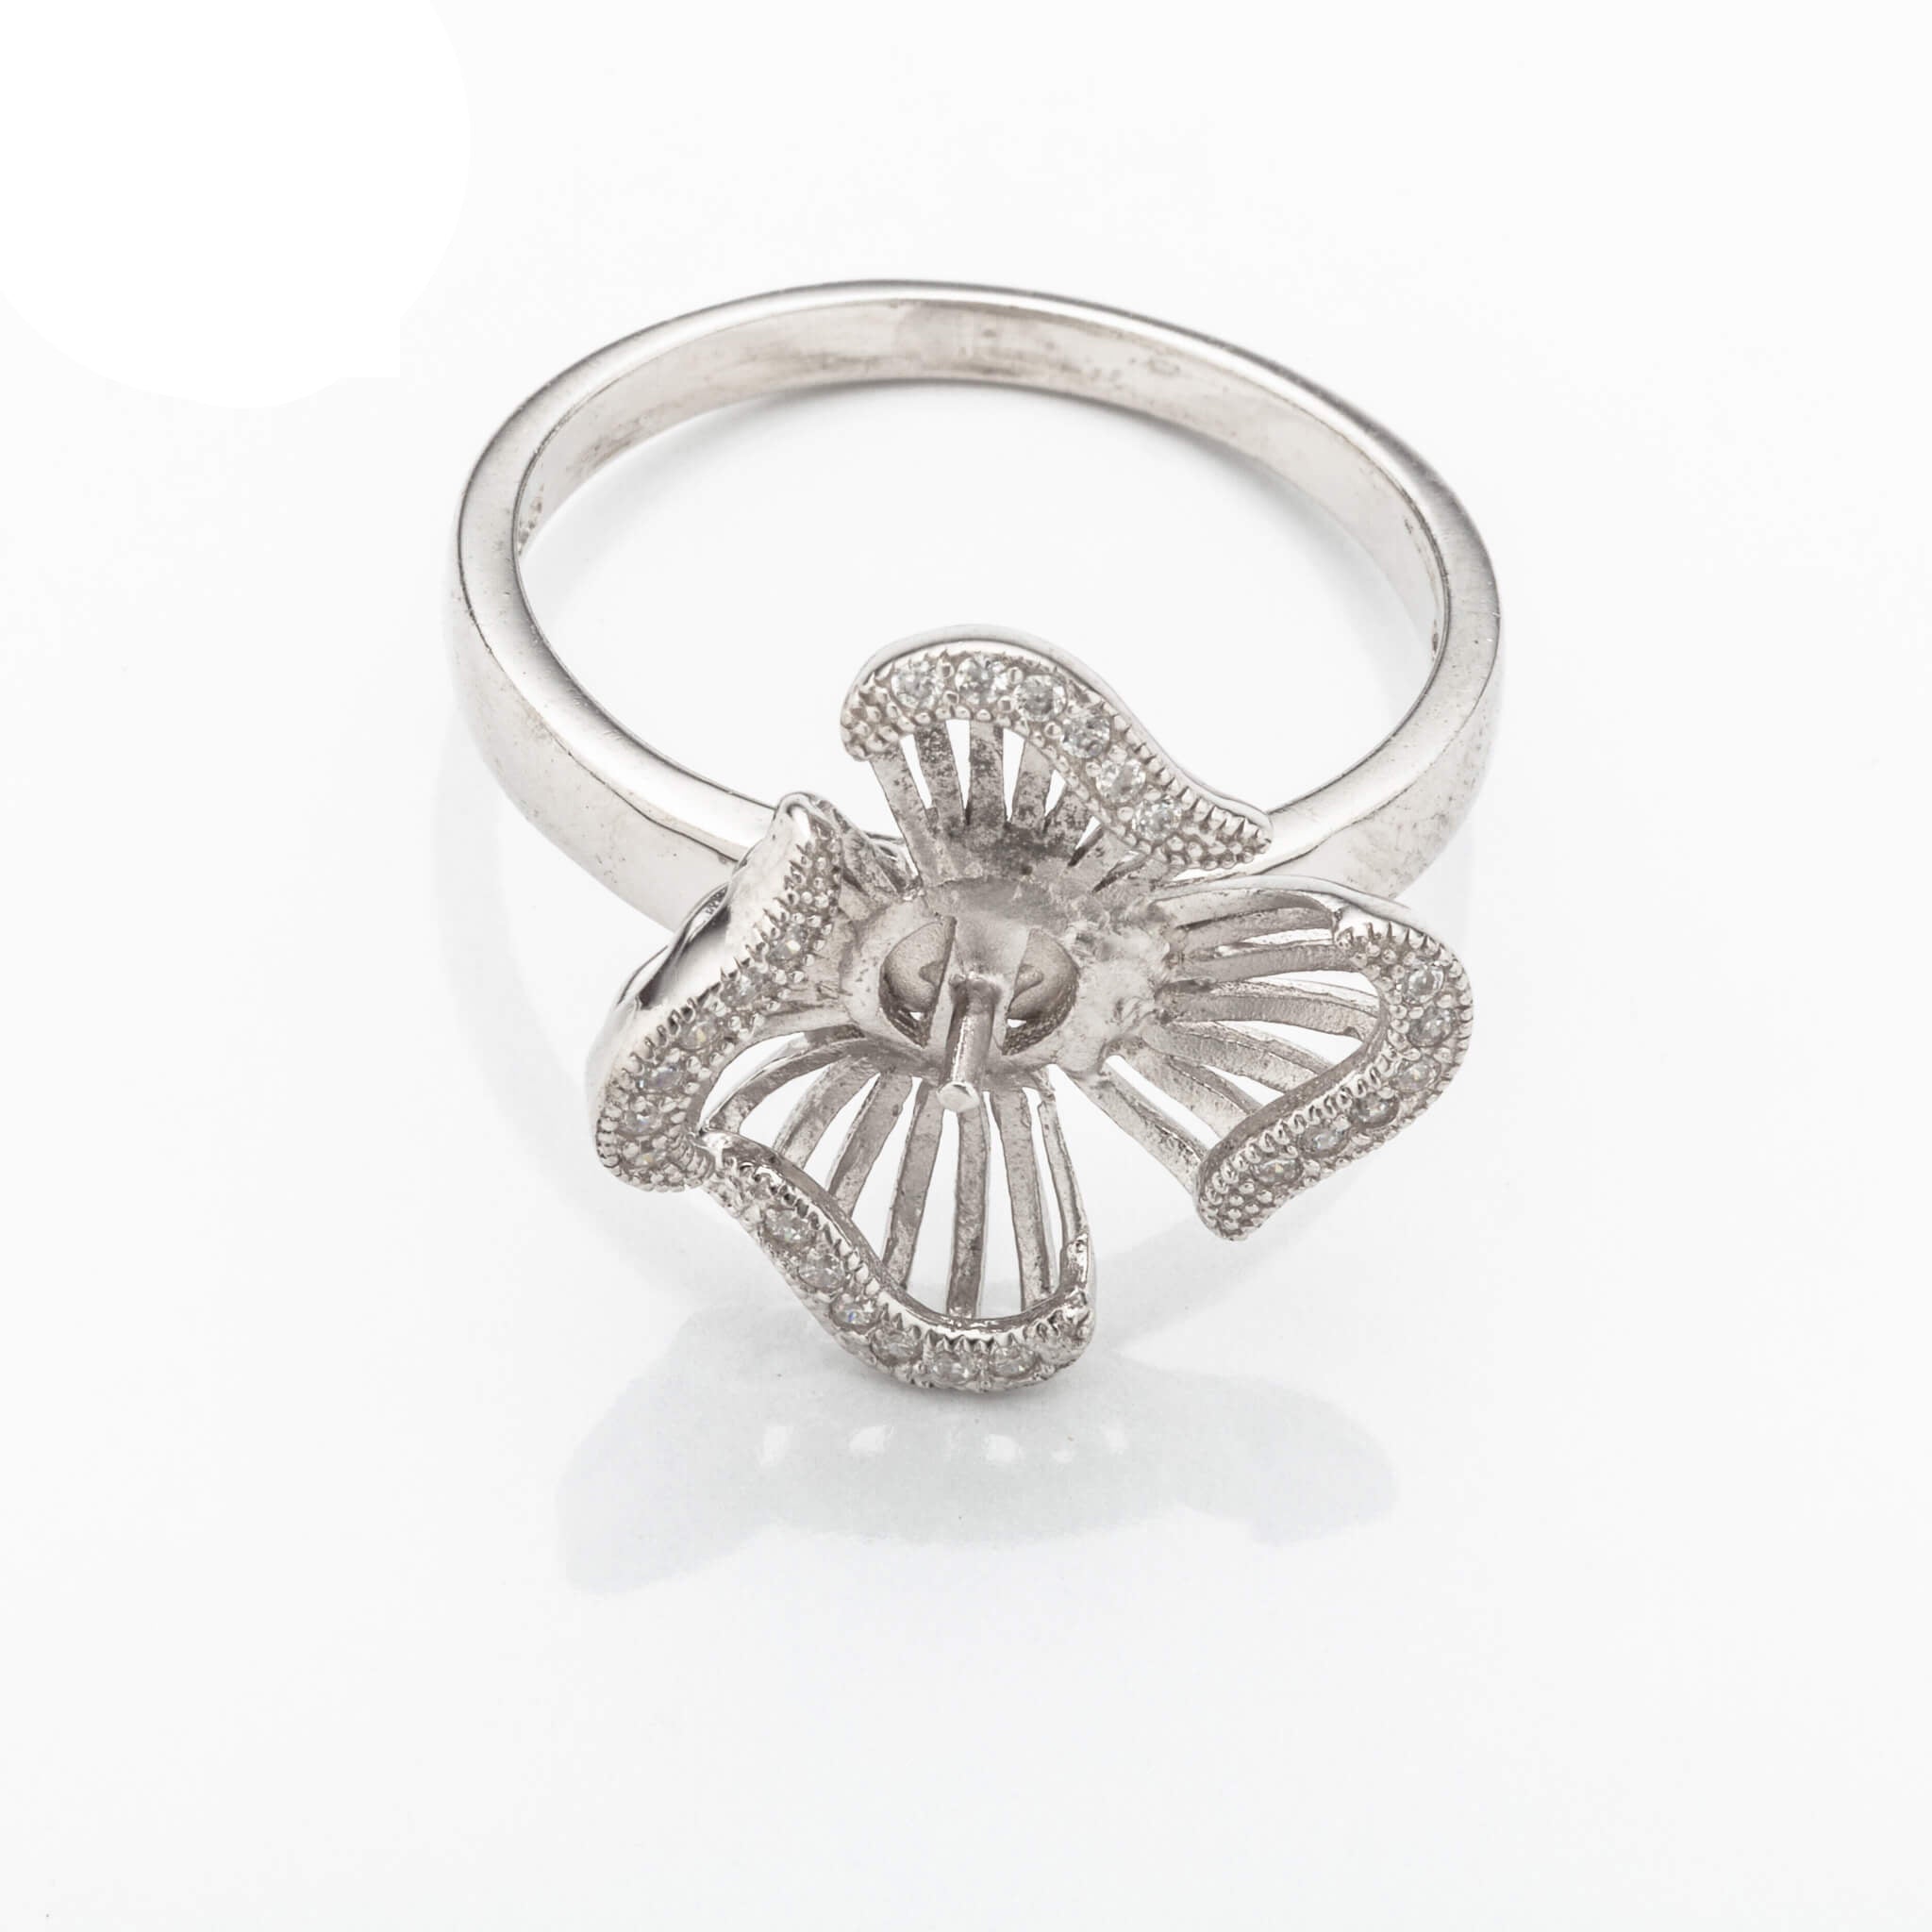 Curly Flower Ring with Cub Zirconia Inlays and Cup and Peg Mounting in Sterling Silver 9mm